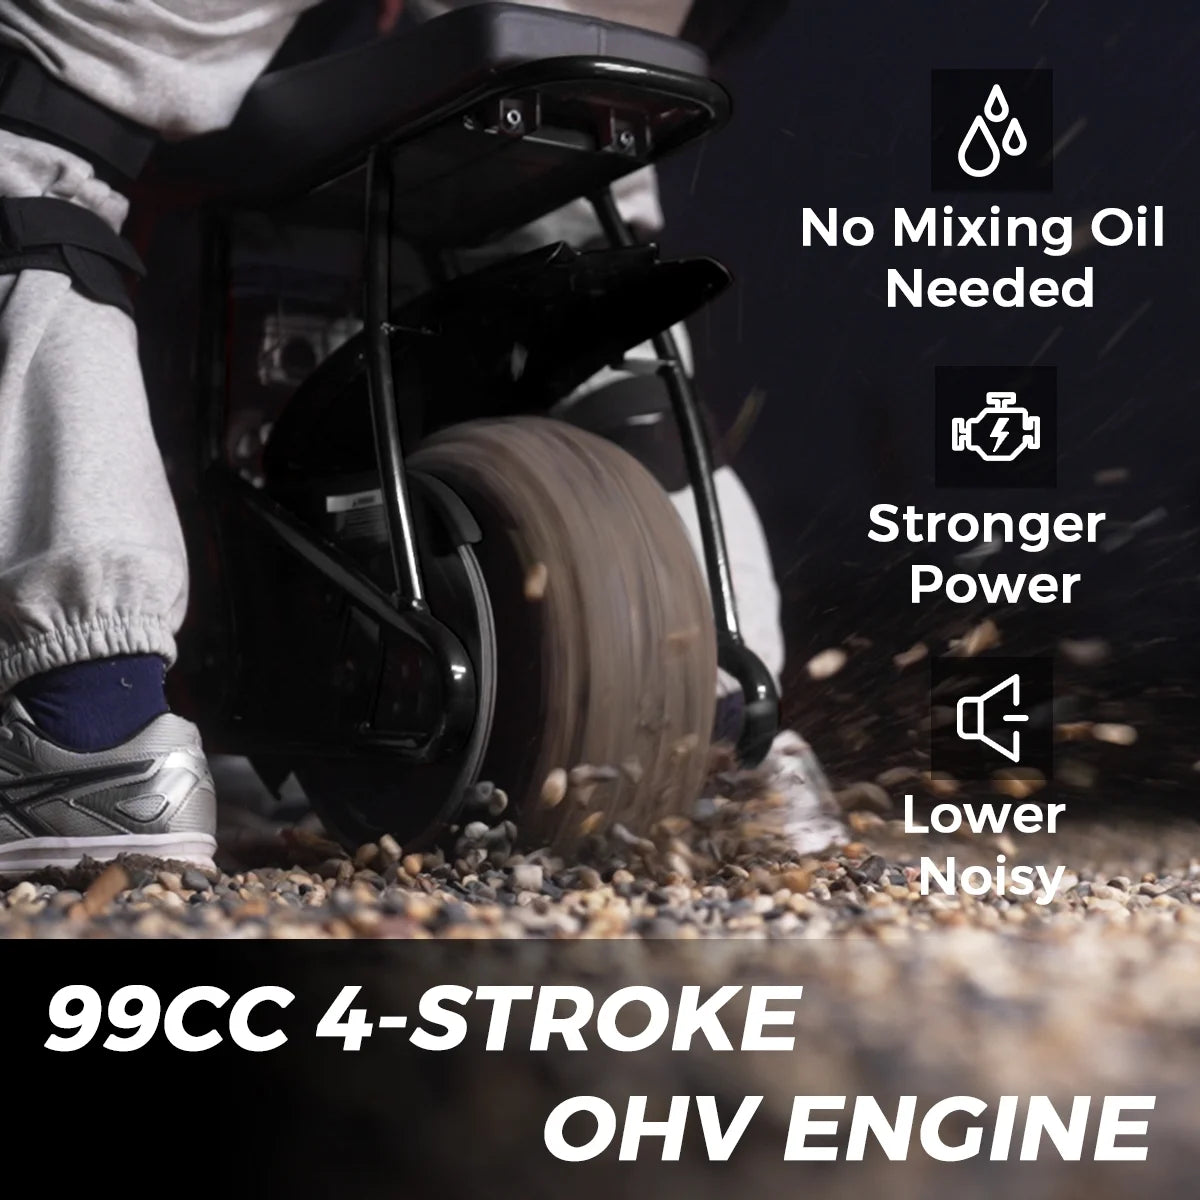 FRP GMB100 Mini Bike, 99CC 4-Stroke Mini Bikes for Adults, Gas Powered Mini Dirt Bike, Off-Road Motorcycle W/LED Headlight and Neck Gaiter, Up to 28 Mph, Weight Support Up to 220 LBS